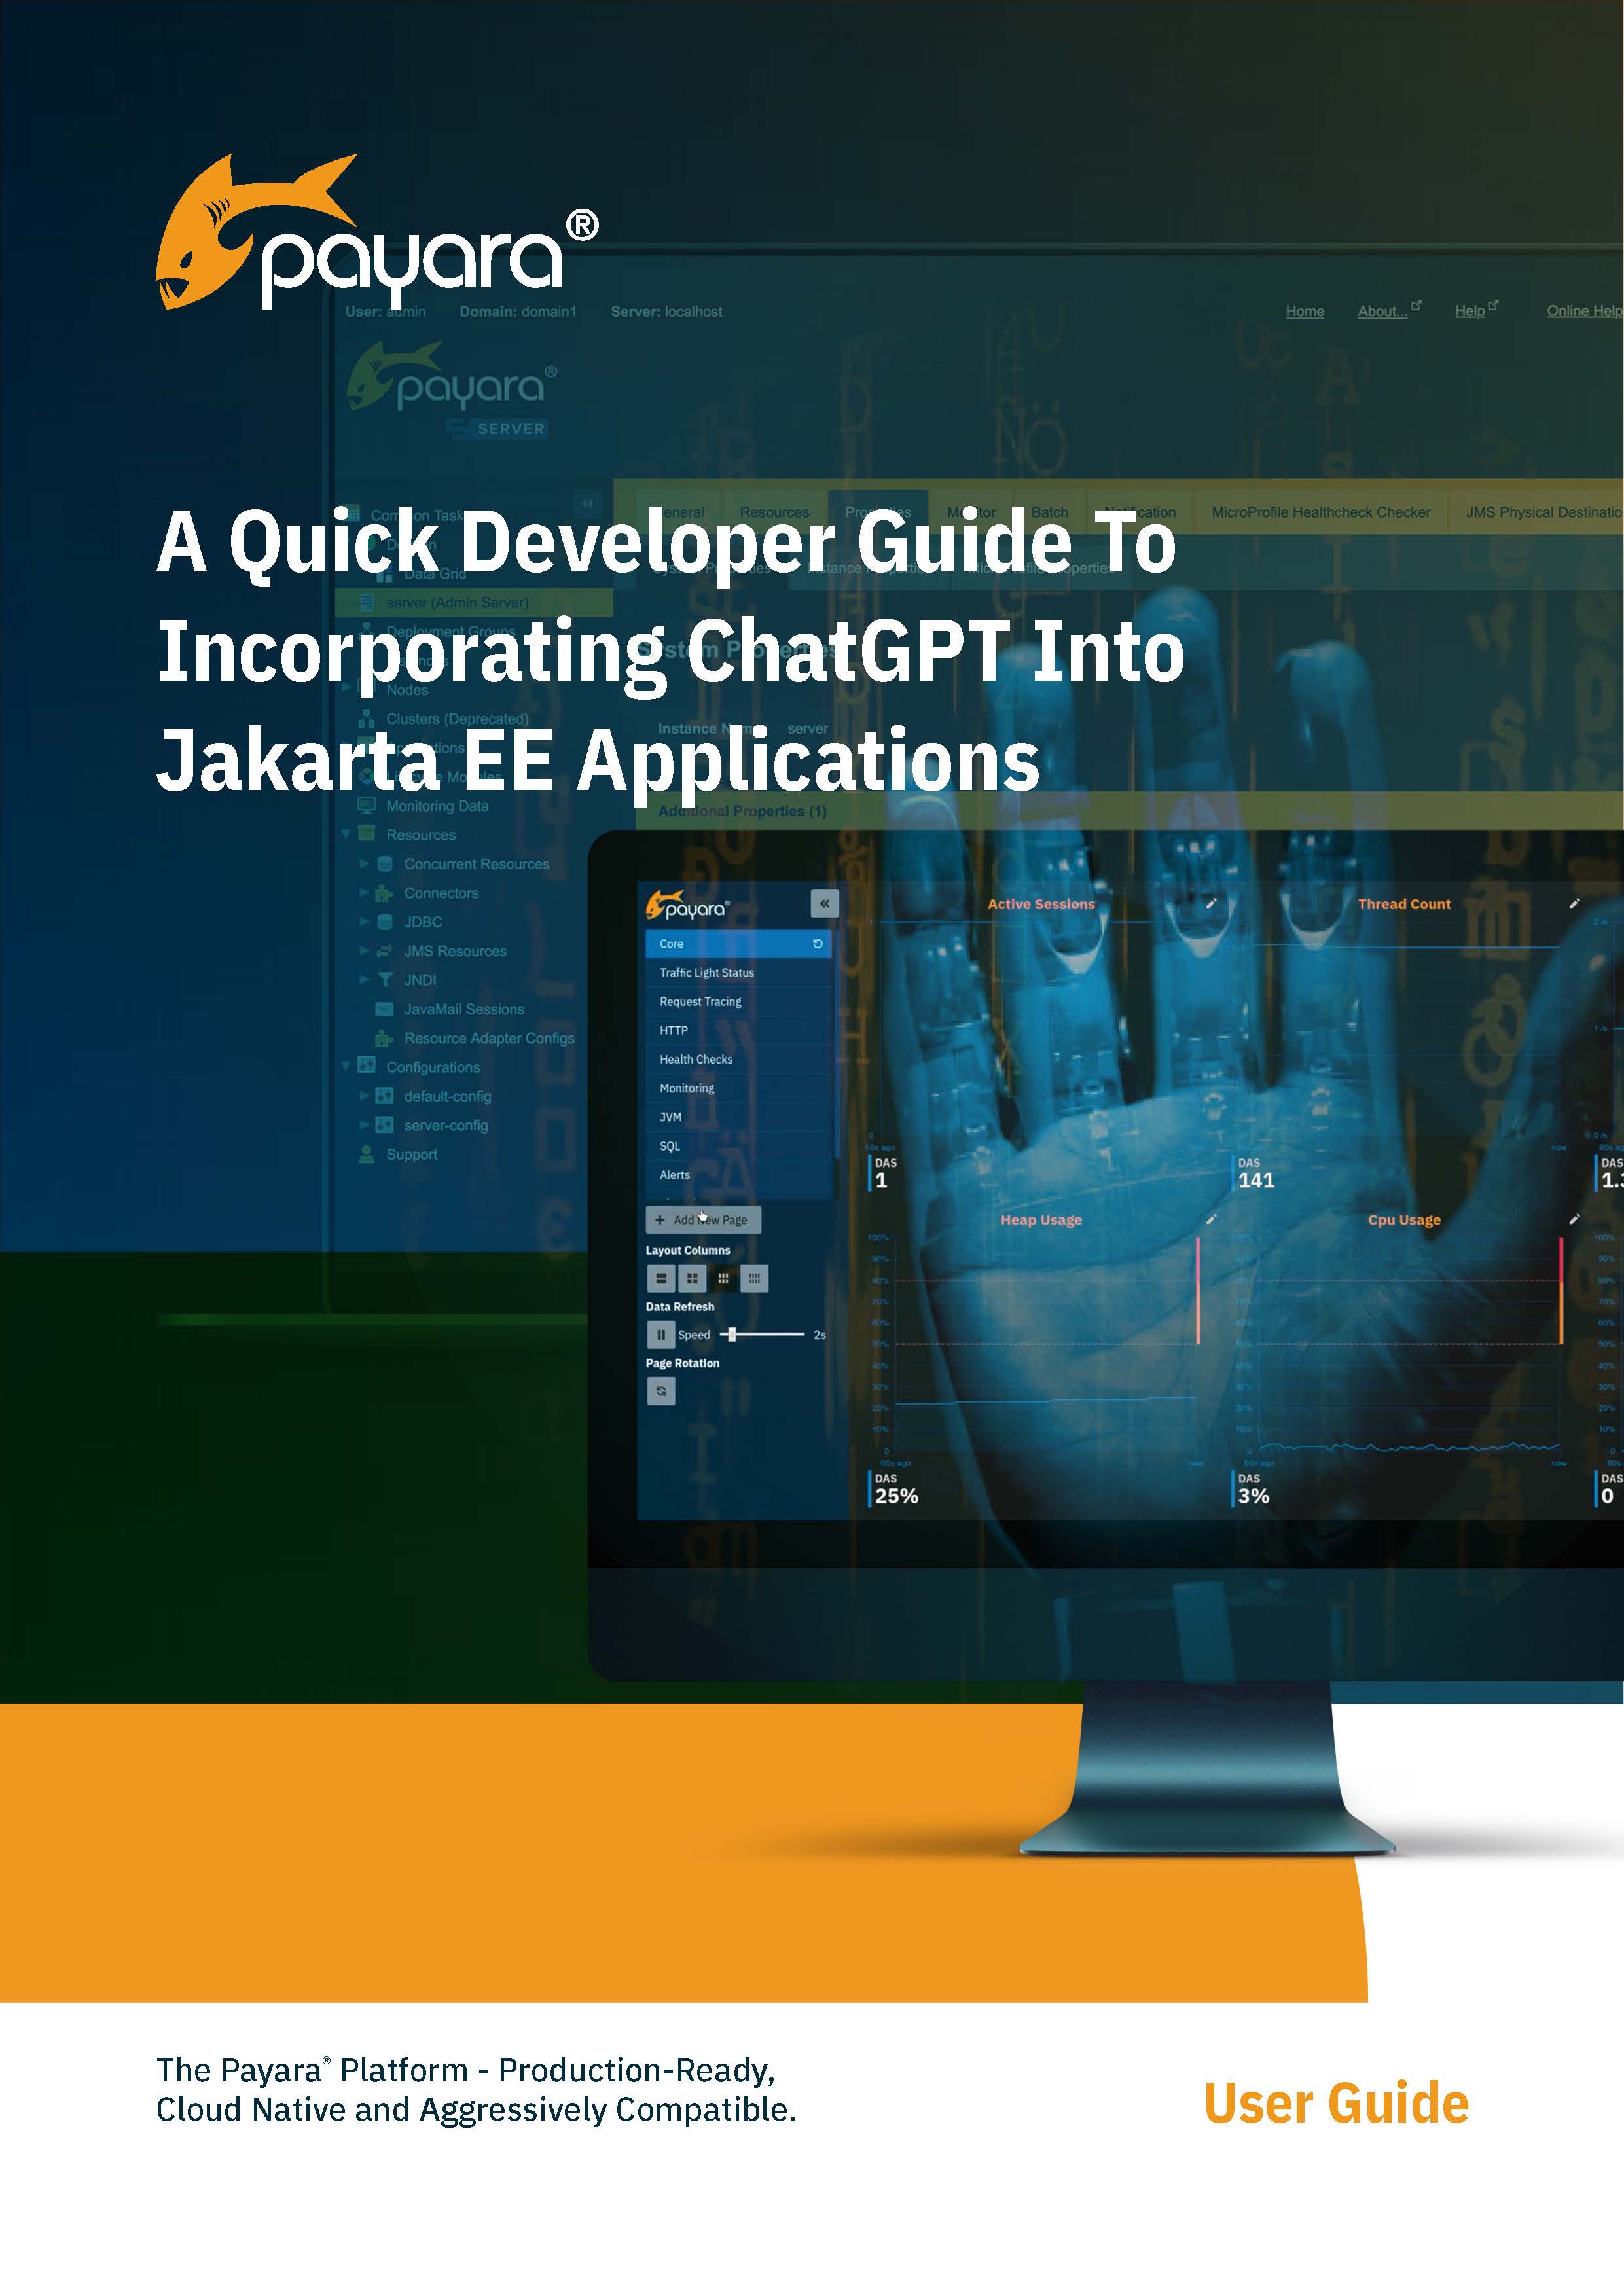 A Quick Developer Guide To Incorporating ChatGPT Into Jakarta EE